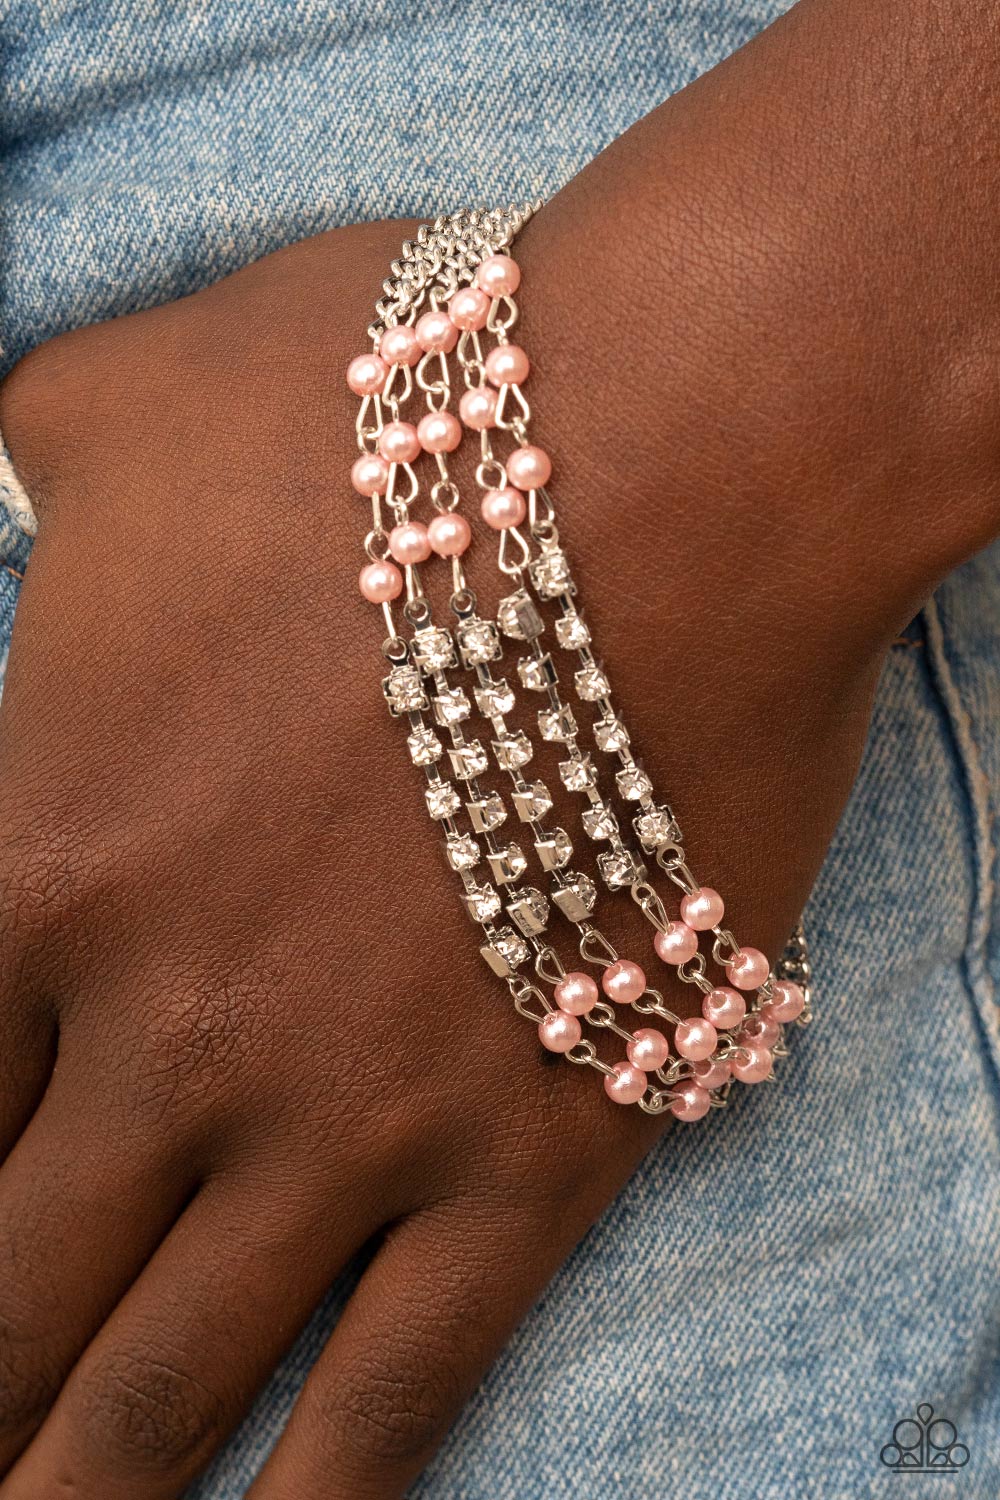 Experienced in Elegance Pink Pearl & White Rhinestone Bracelet - Paparazzi Accessories- lightbox - CarasShop.com - $5 Jewelry by Cara Jewels